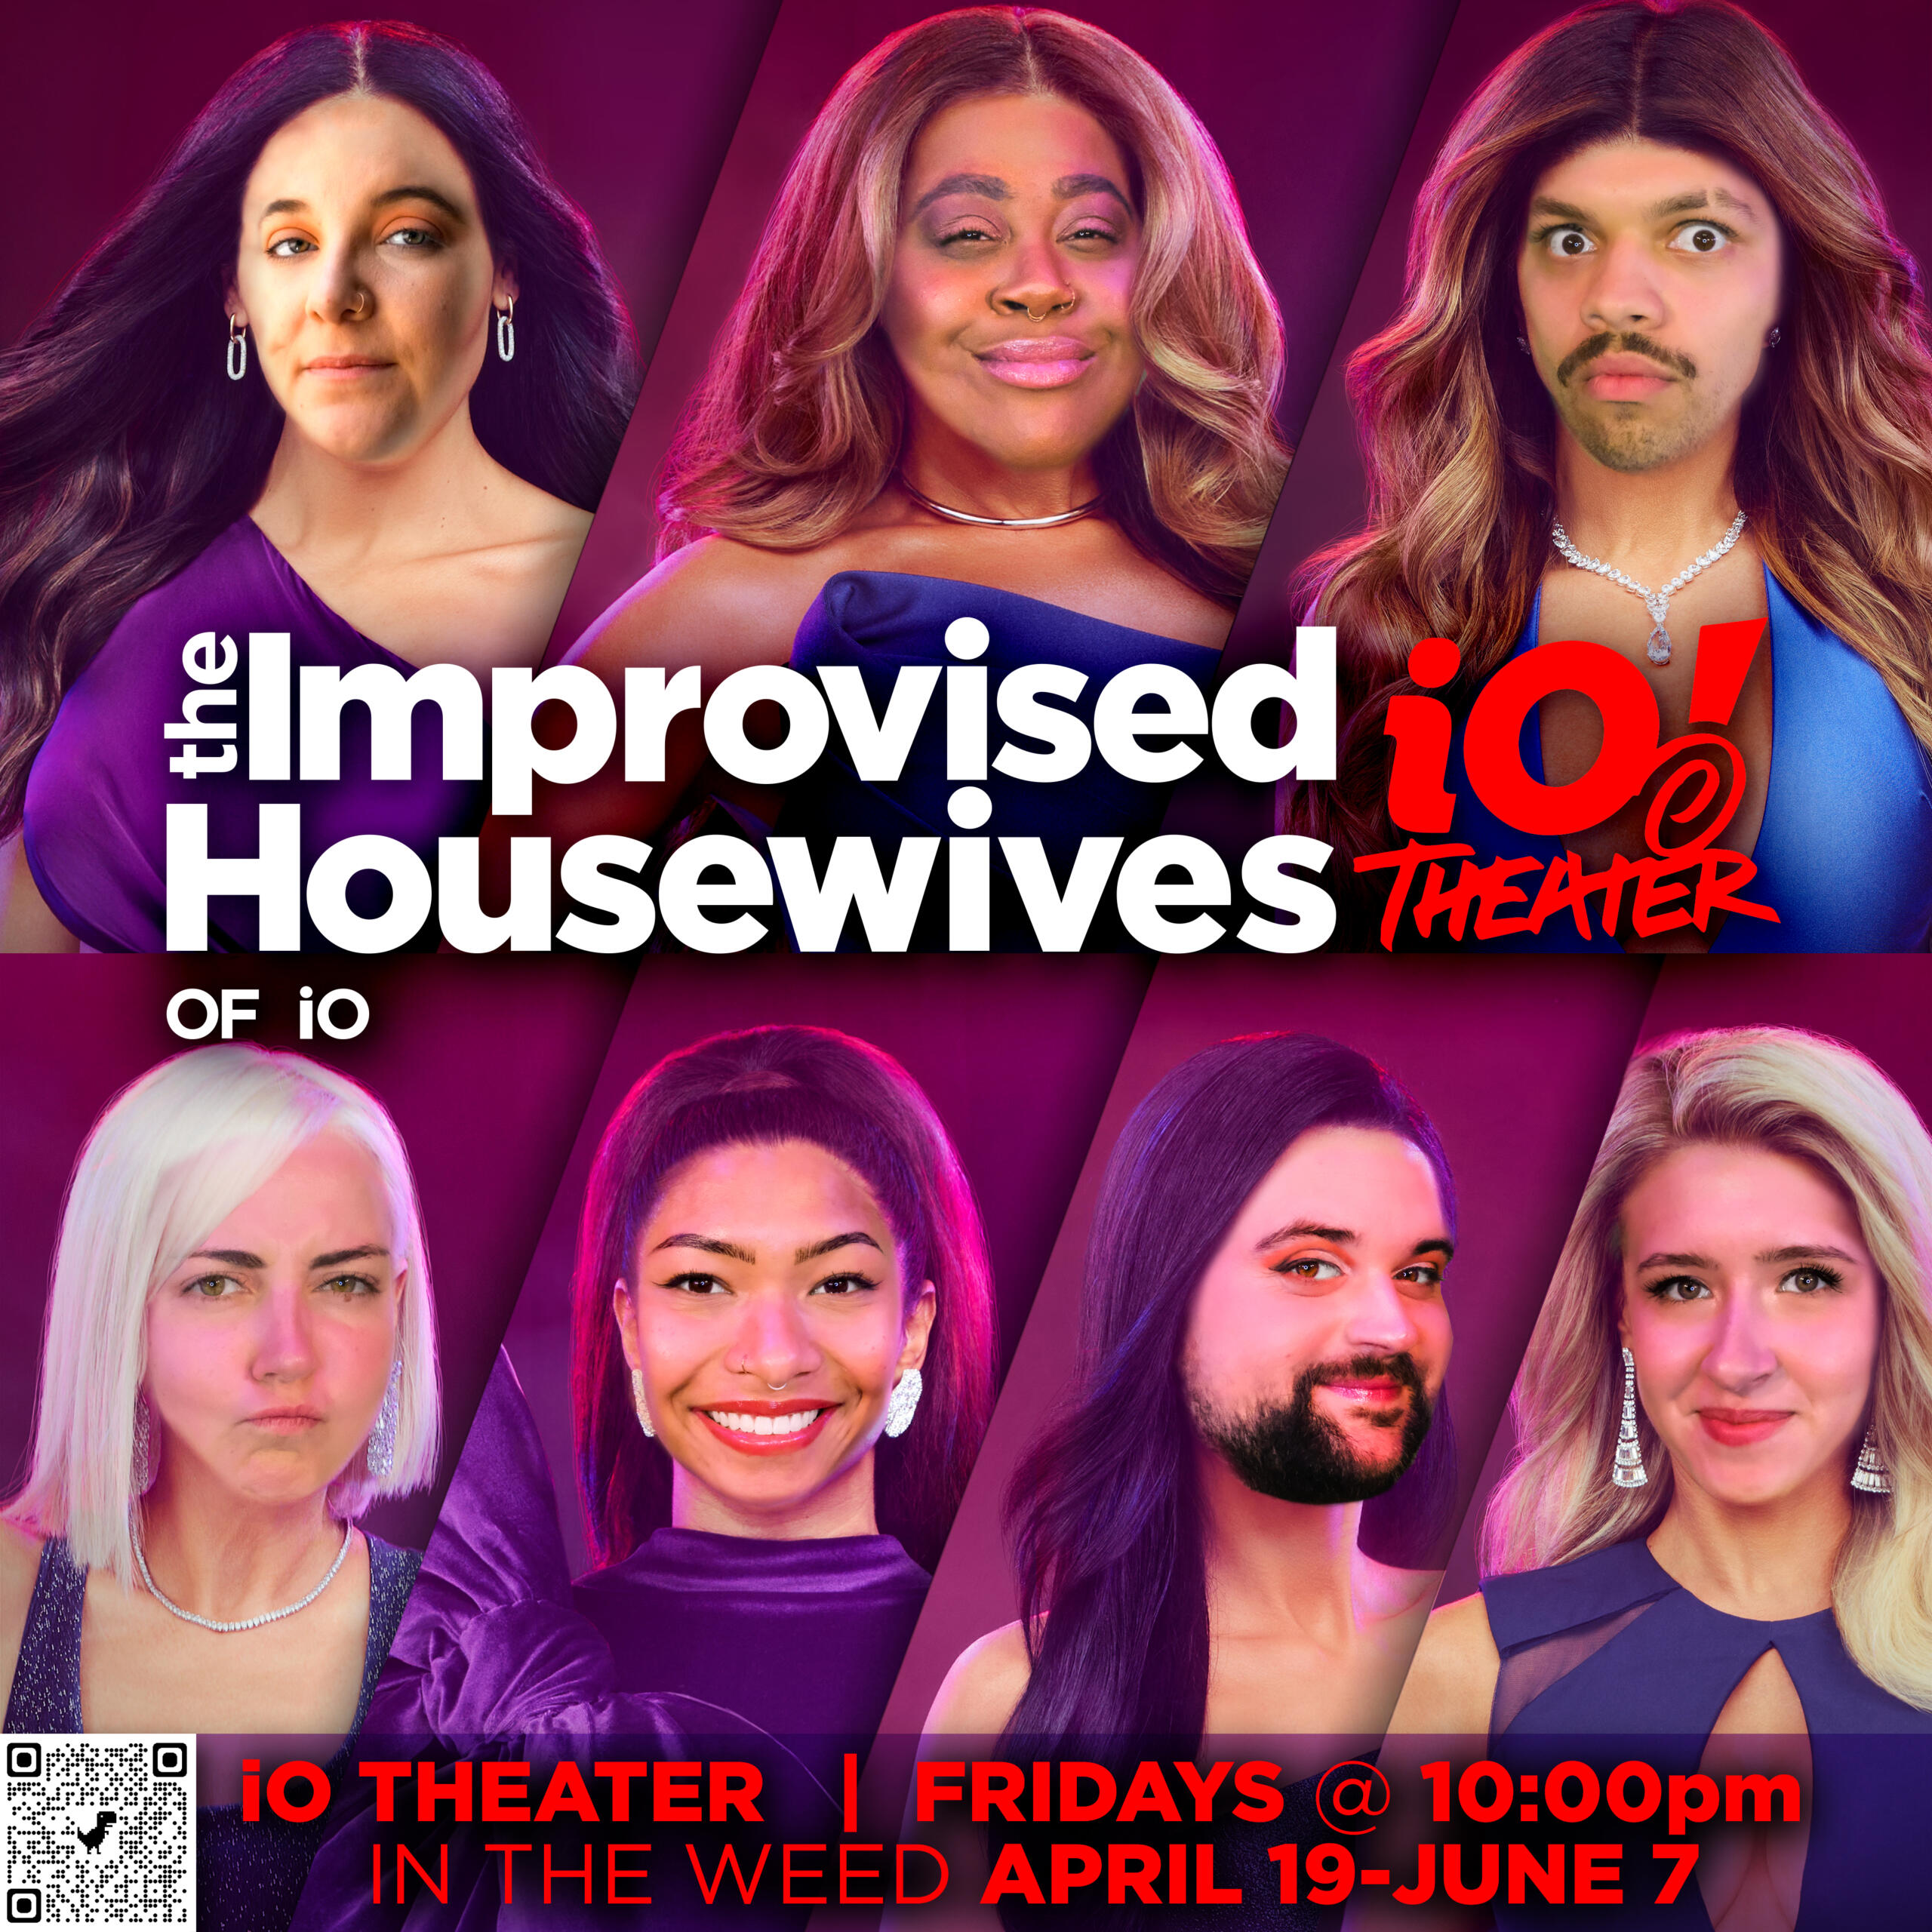 The Improvised Housewives of iO